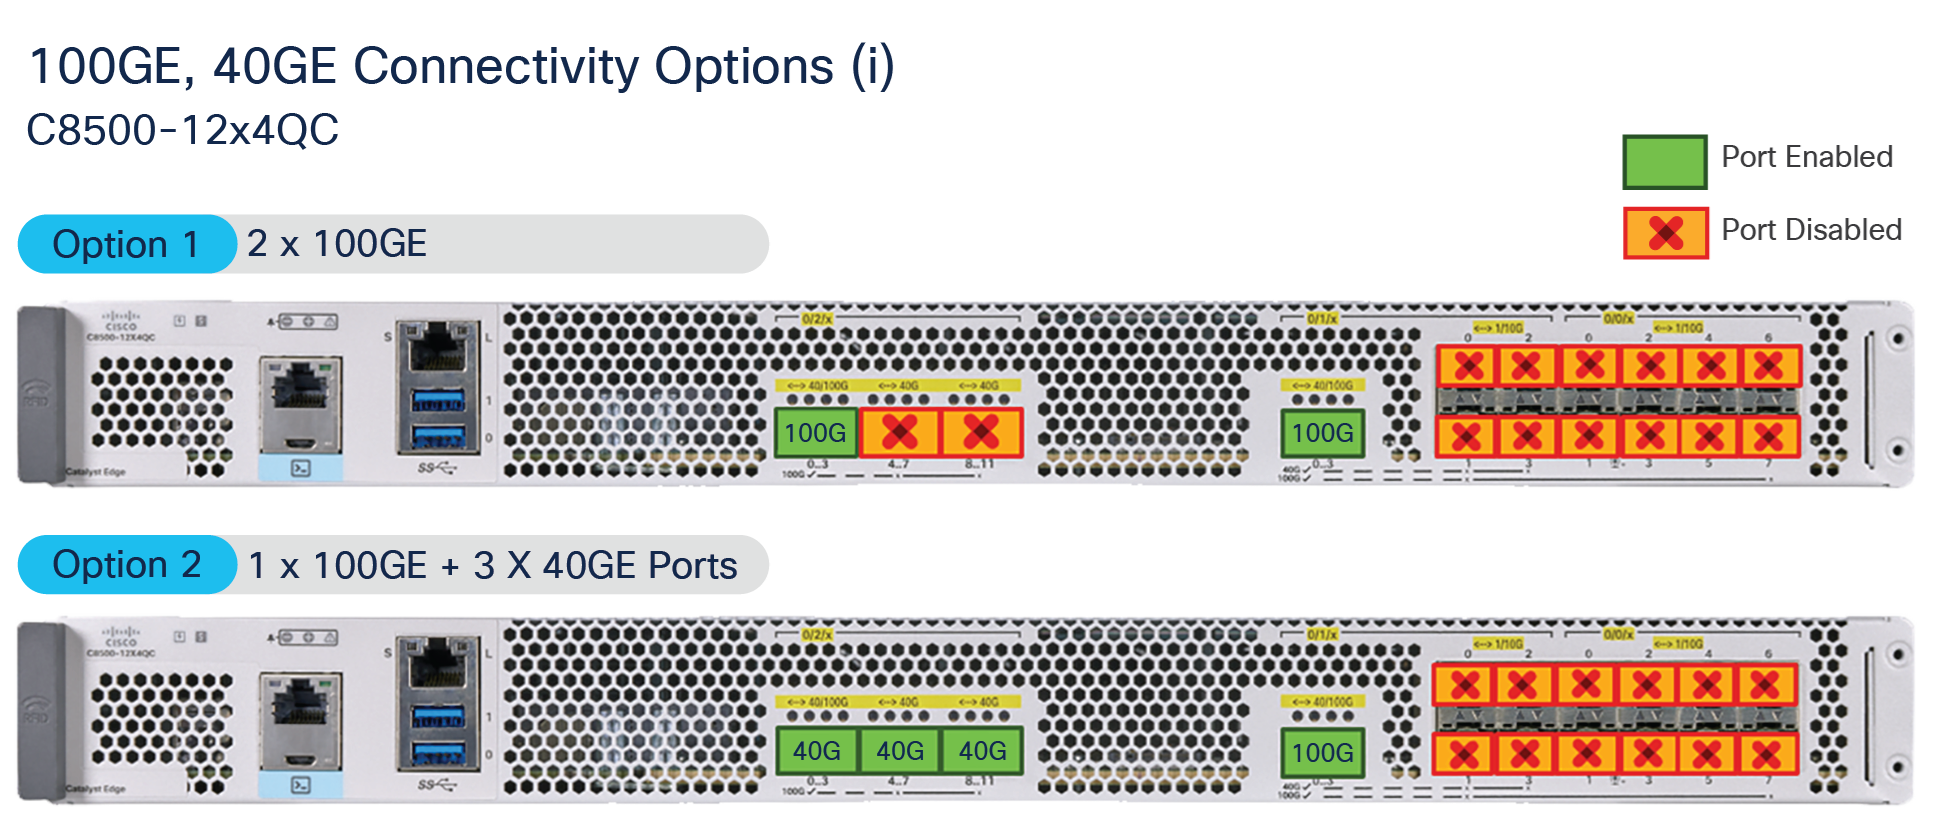 100 GE and 40 GE connectivity options for the C8500-12X4QC model